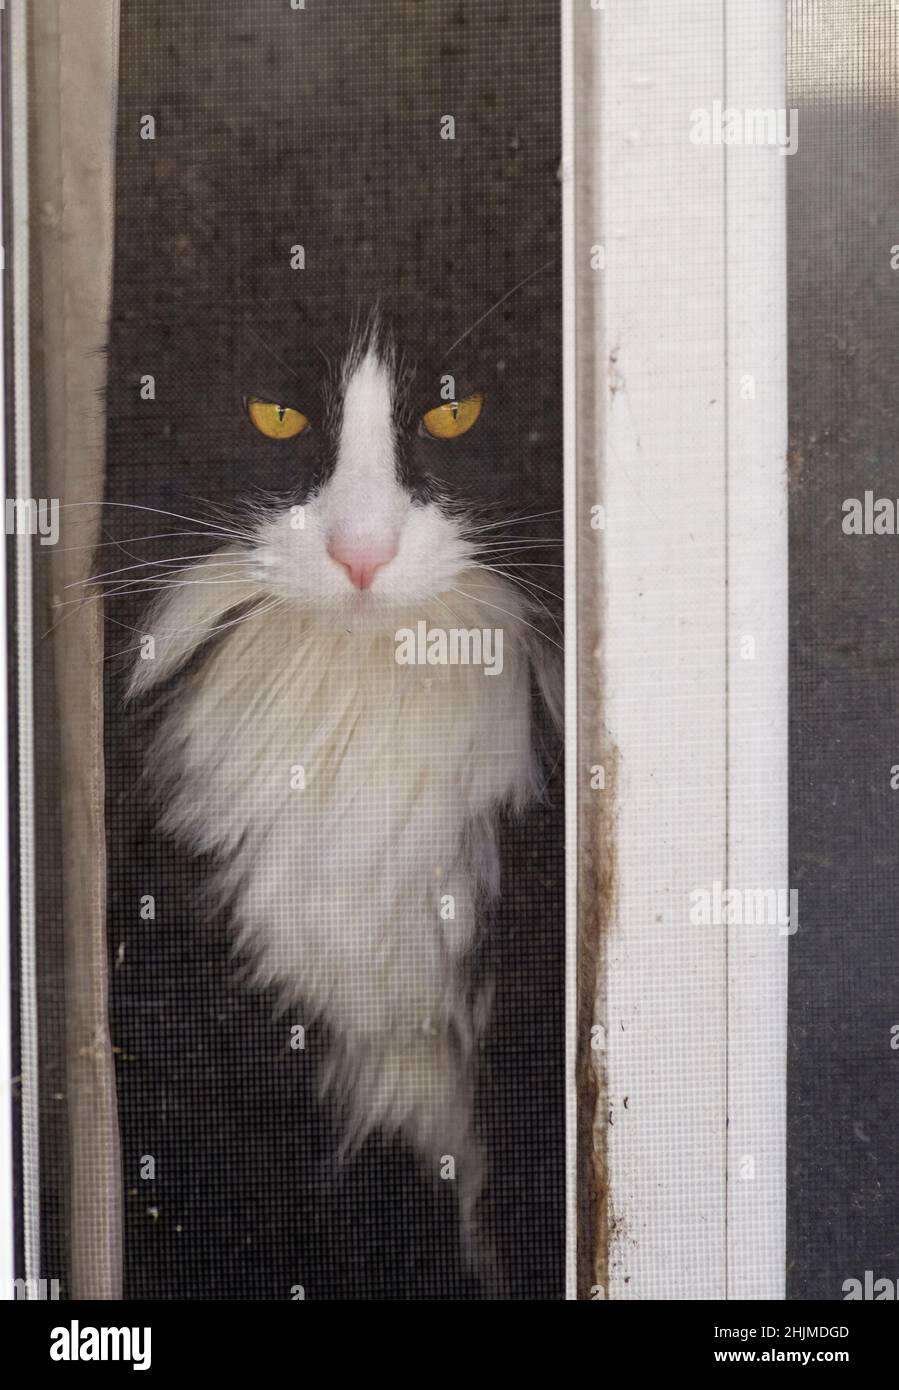 black and white catwith yellow eyes  looking through the screen of an open sliding door Stock Photo